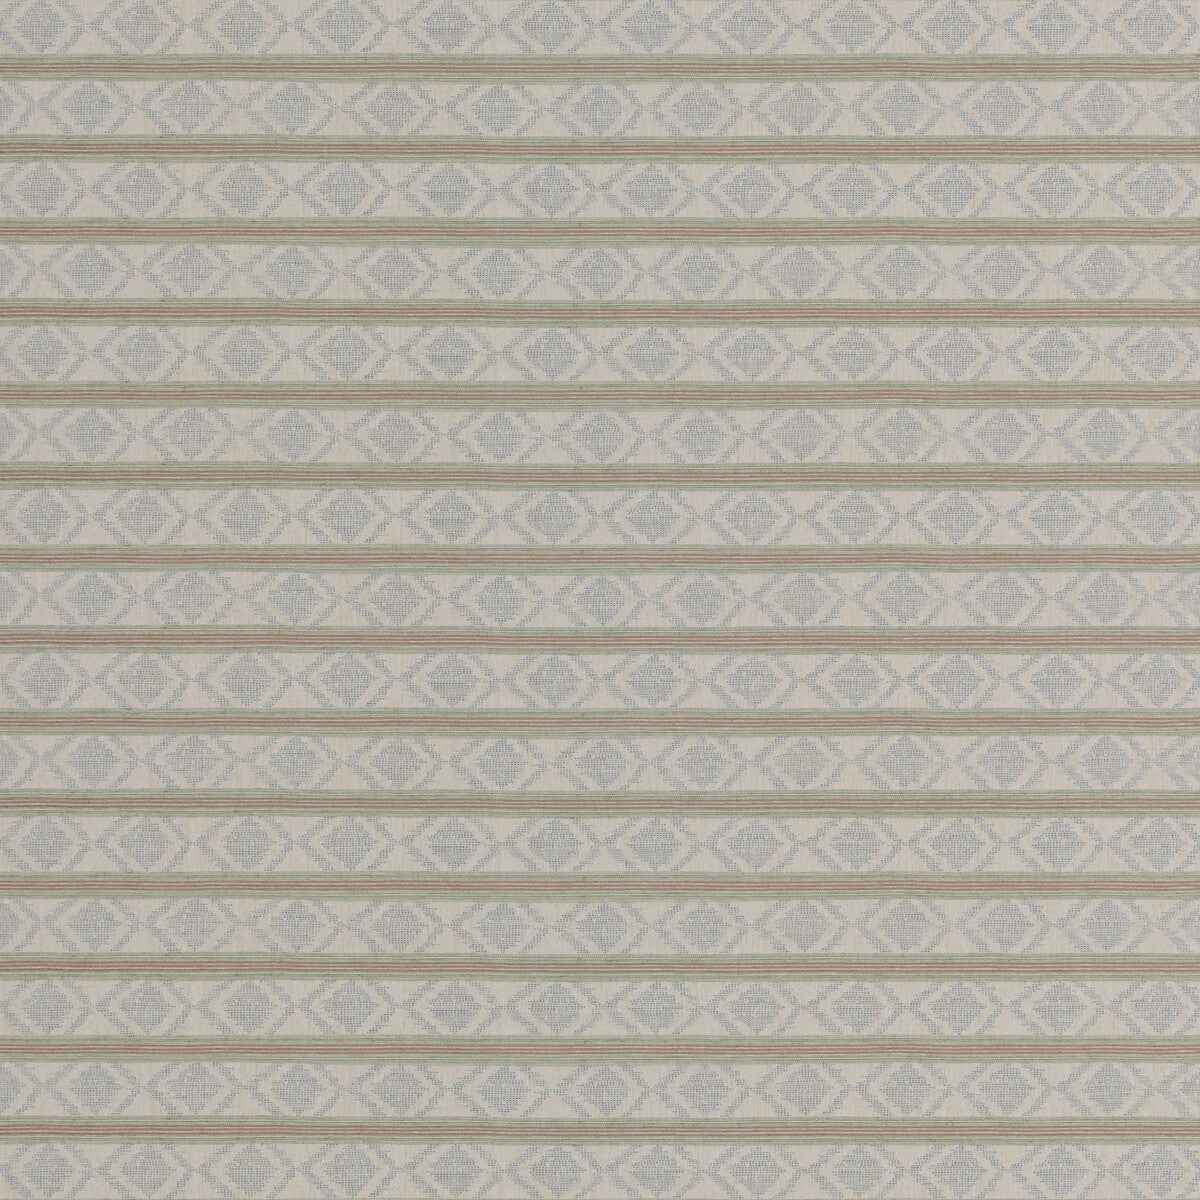 Burford Stripe fabric in aqua color - pattern BF11034.6.0 - by G P &amp; J Baker in the Burford Weaves collection